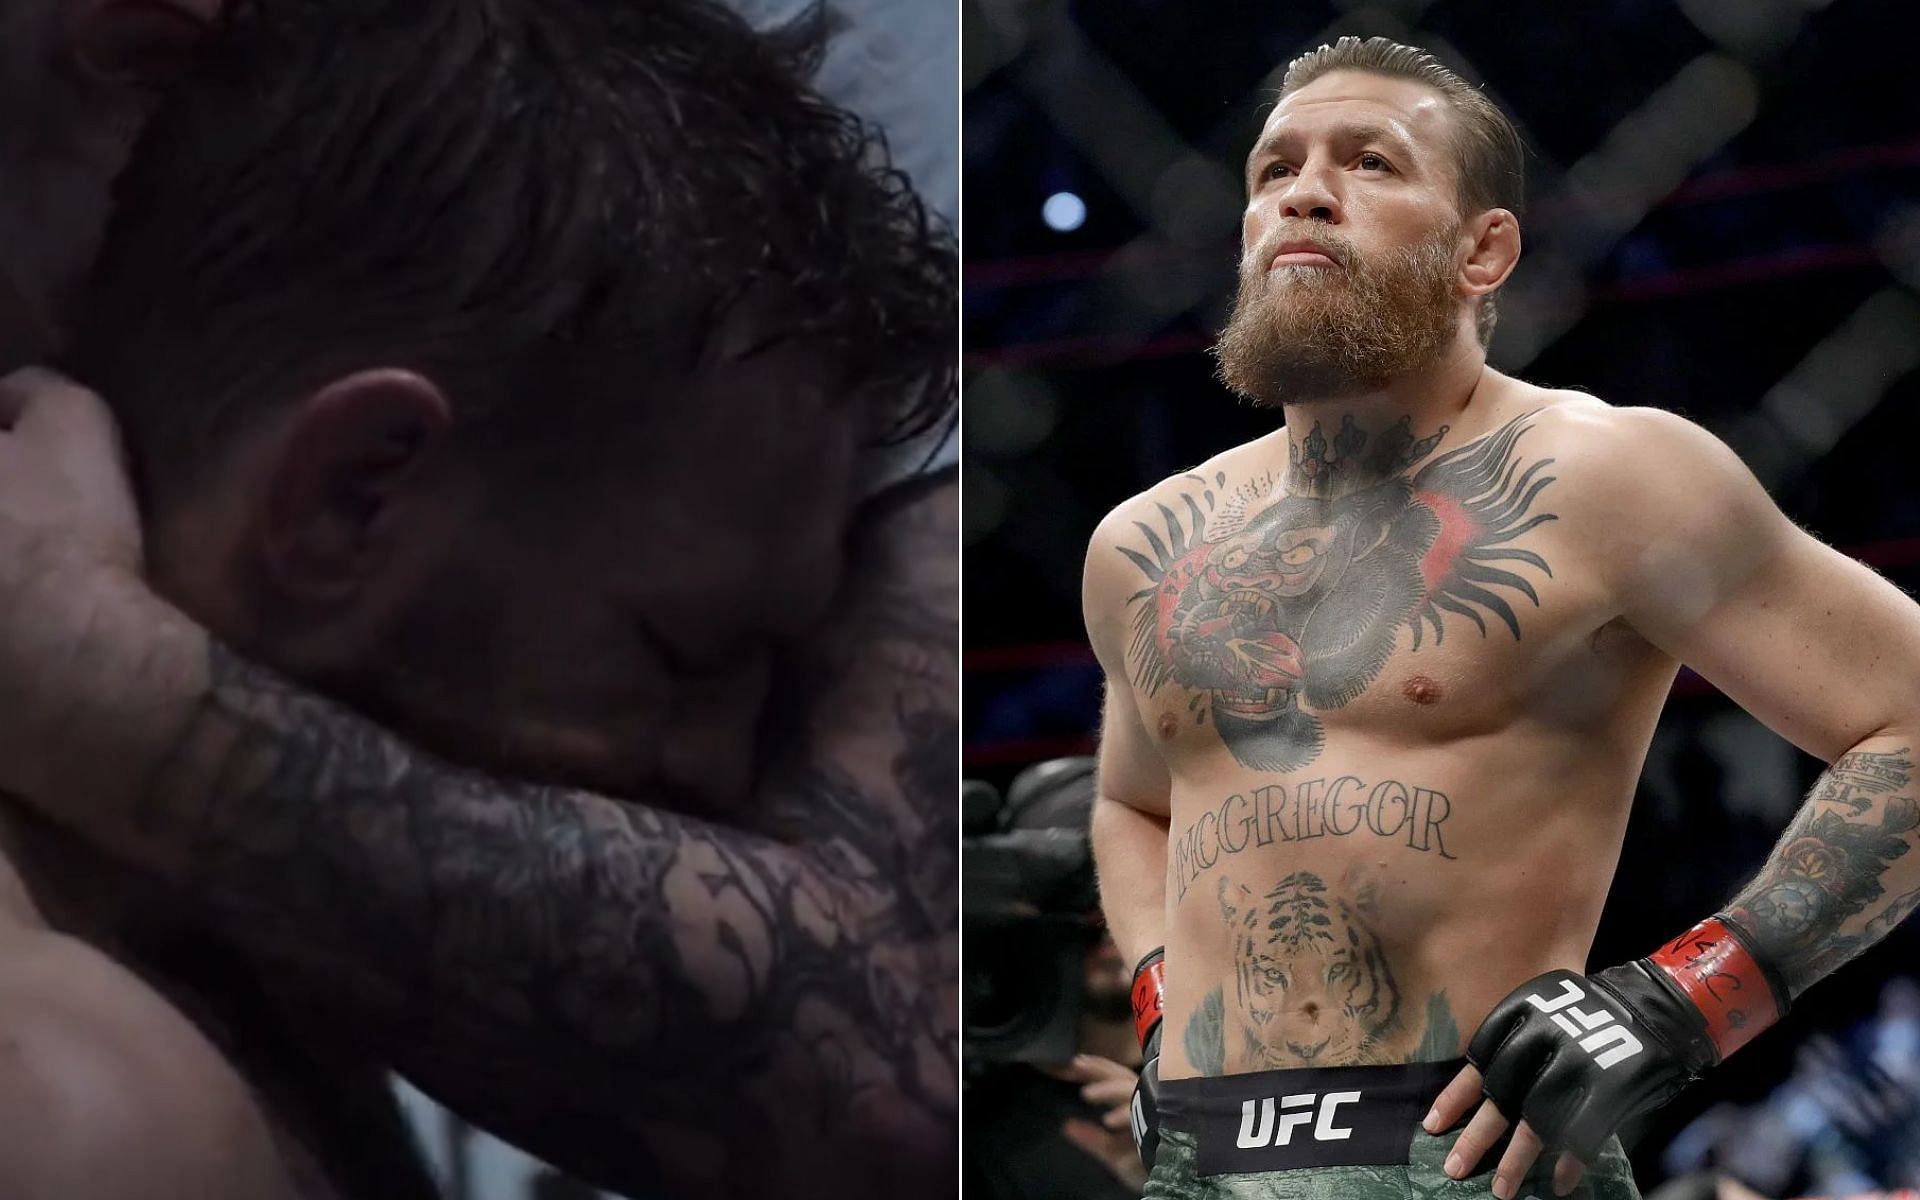 Conor McGregor post-fight UFC 229 [Left], and Conor McGregor [Right] [Photo credit: @SpinninBackfist - Twitter]